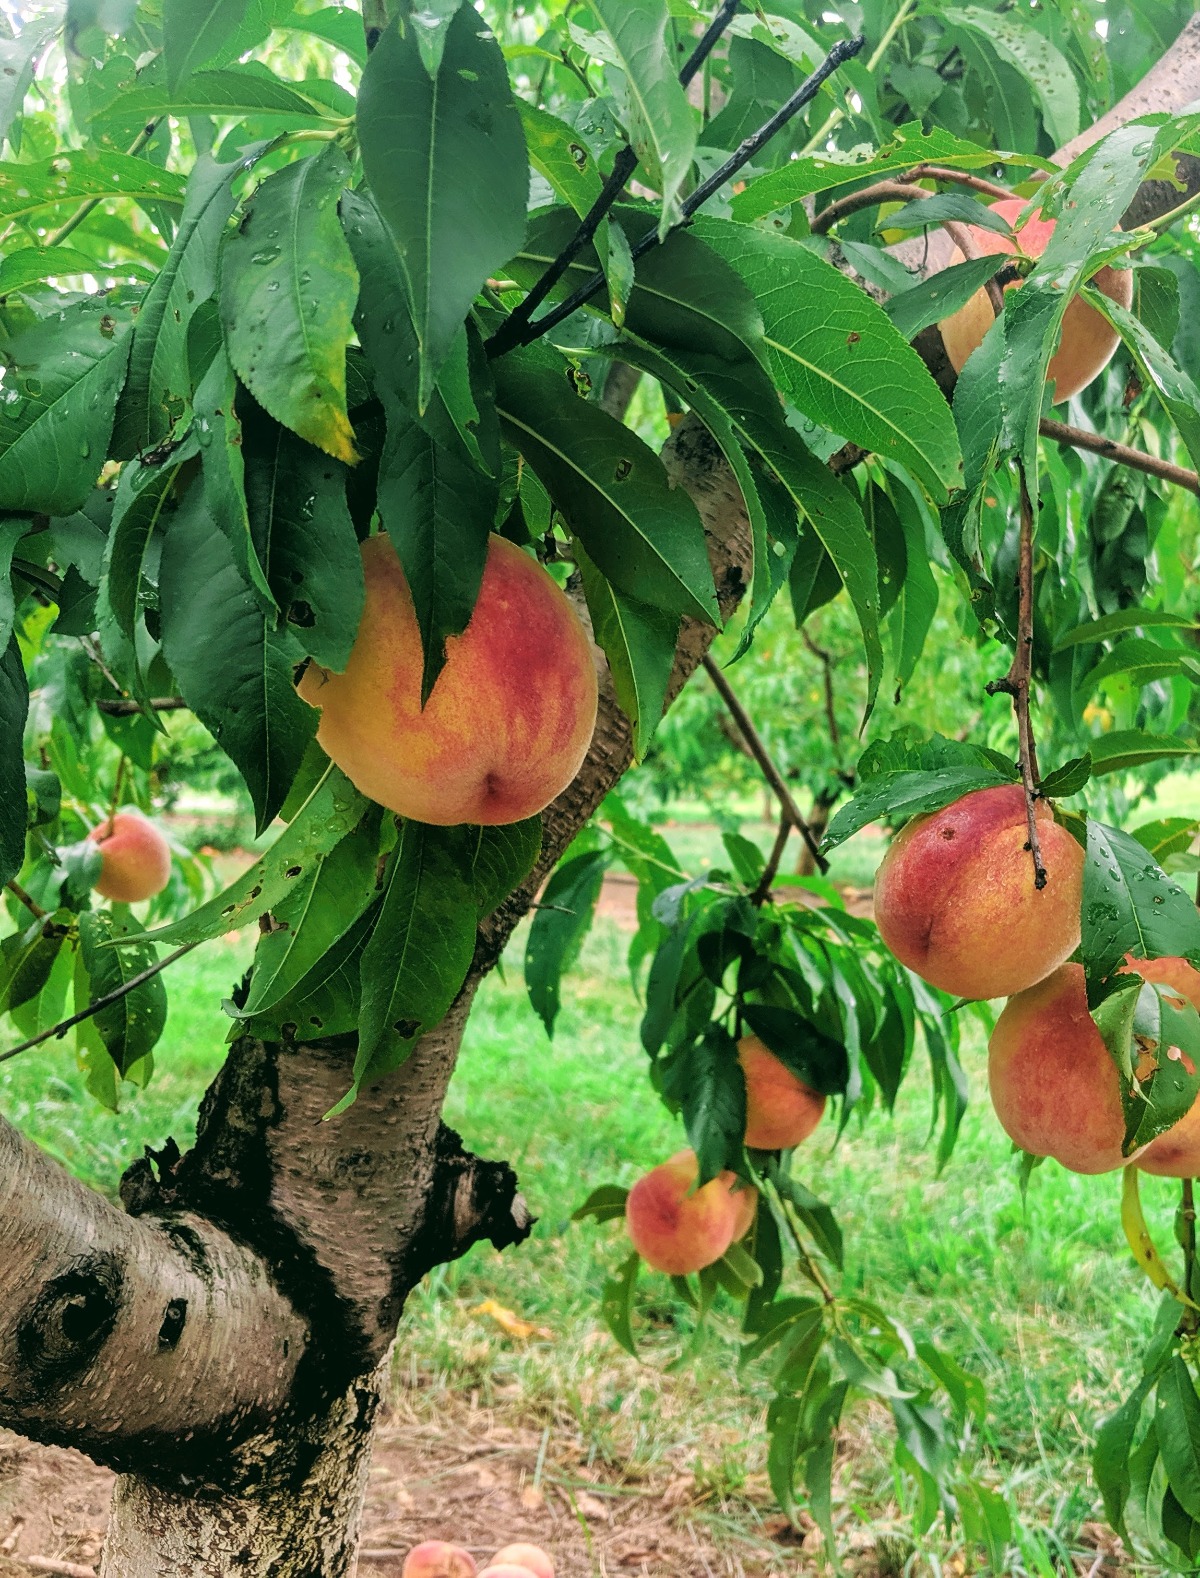 Mature peach tree full of peaches at a local orchard